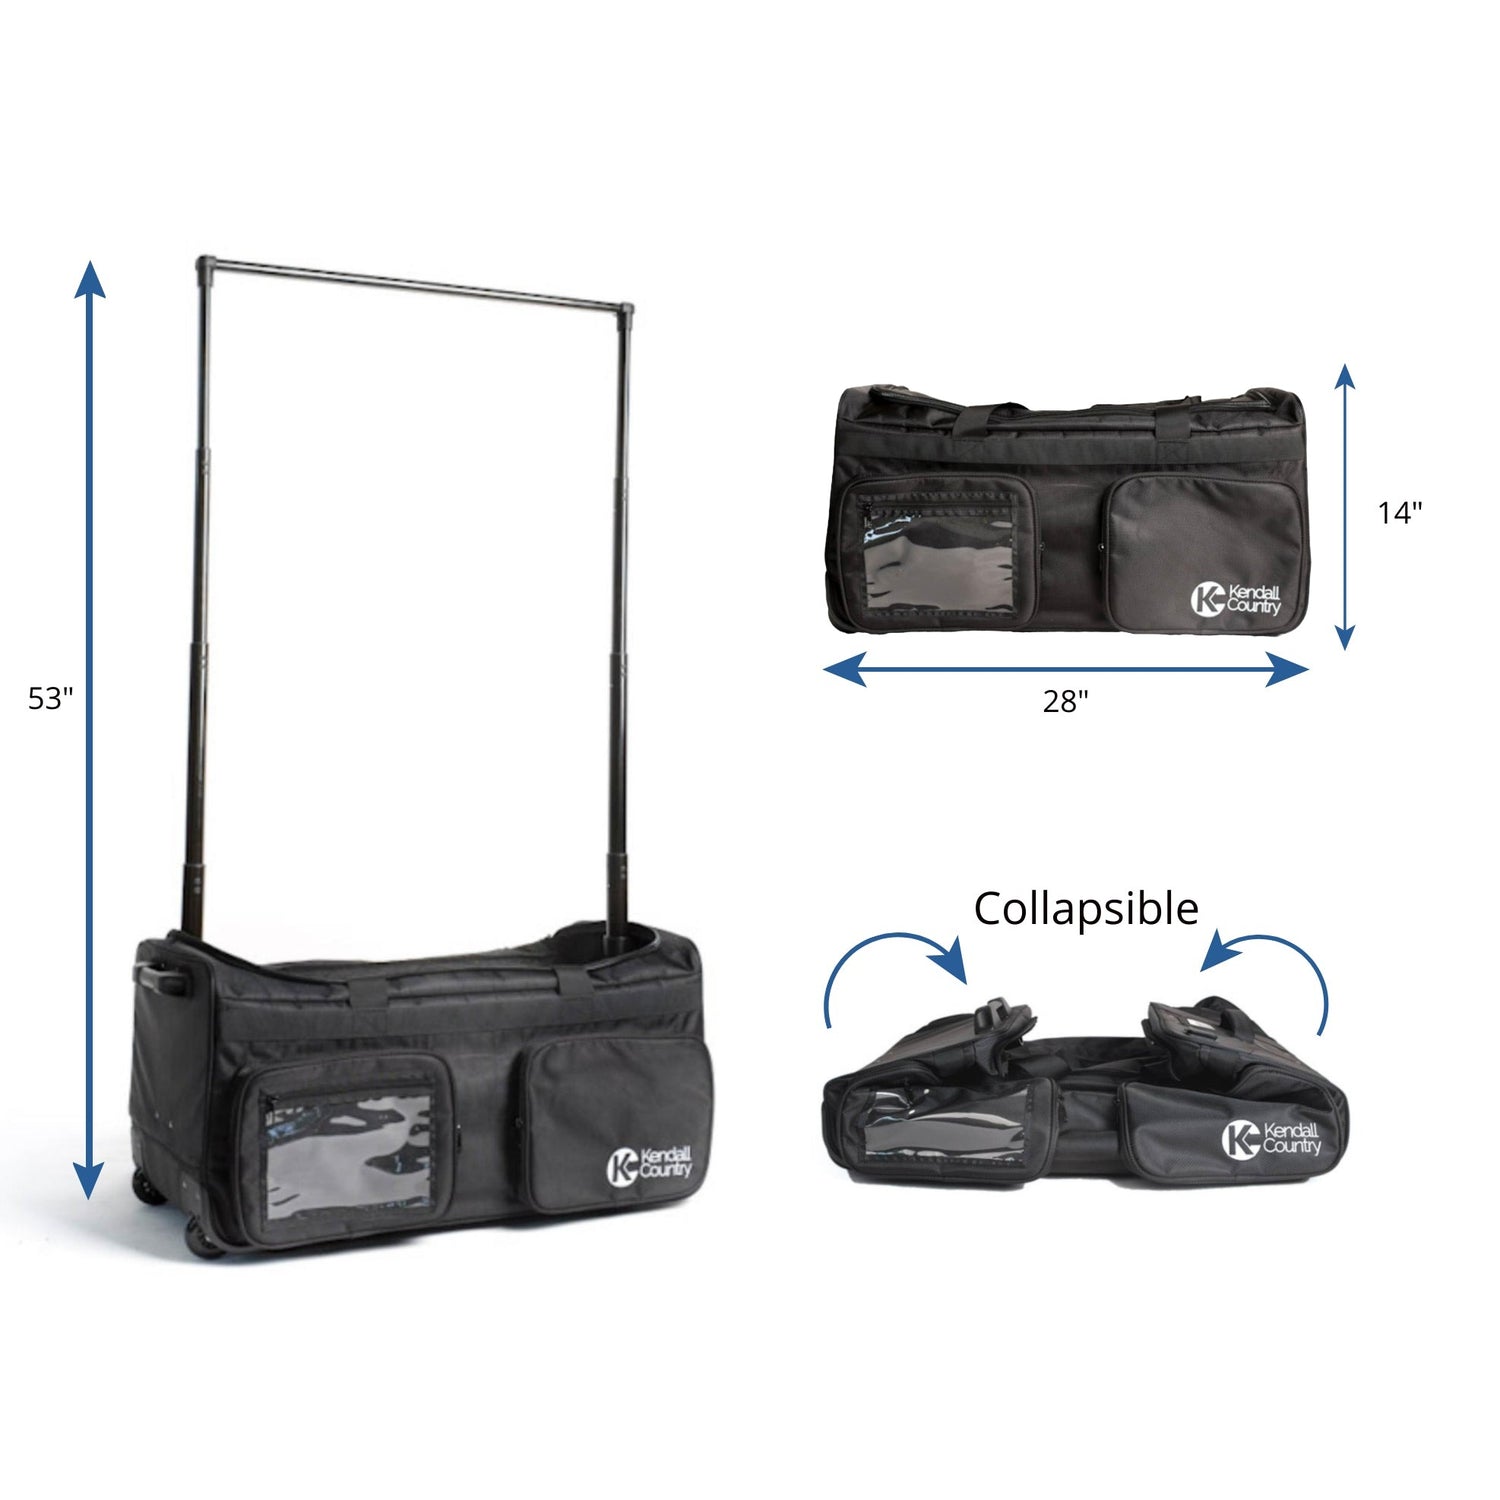 Kendall Country Garment Bag with Rack dimensions